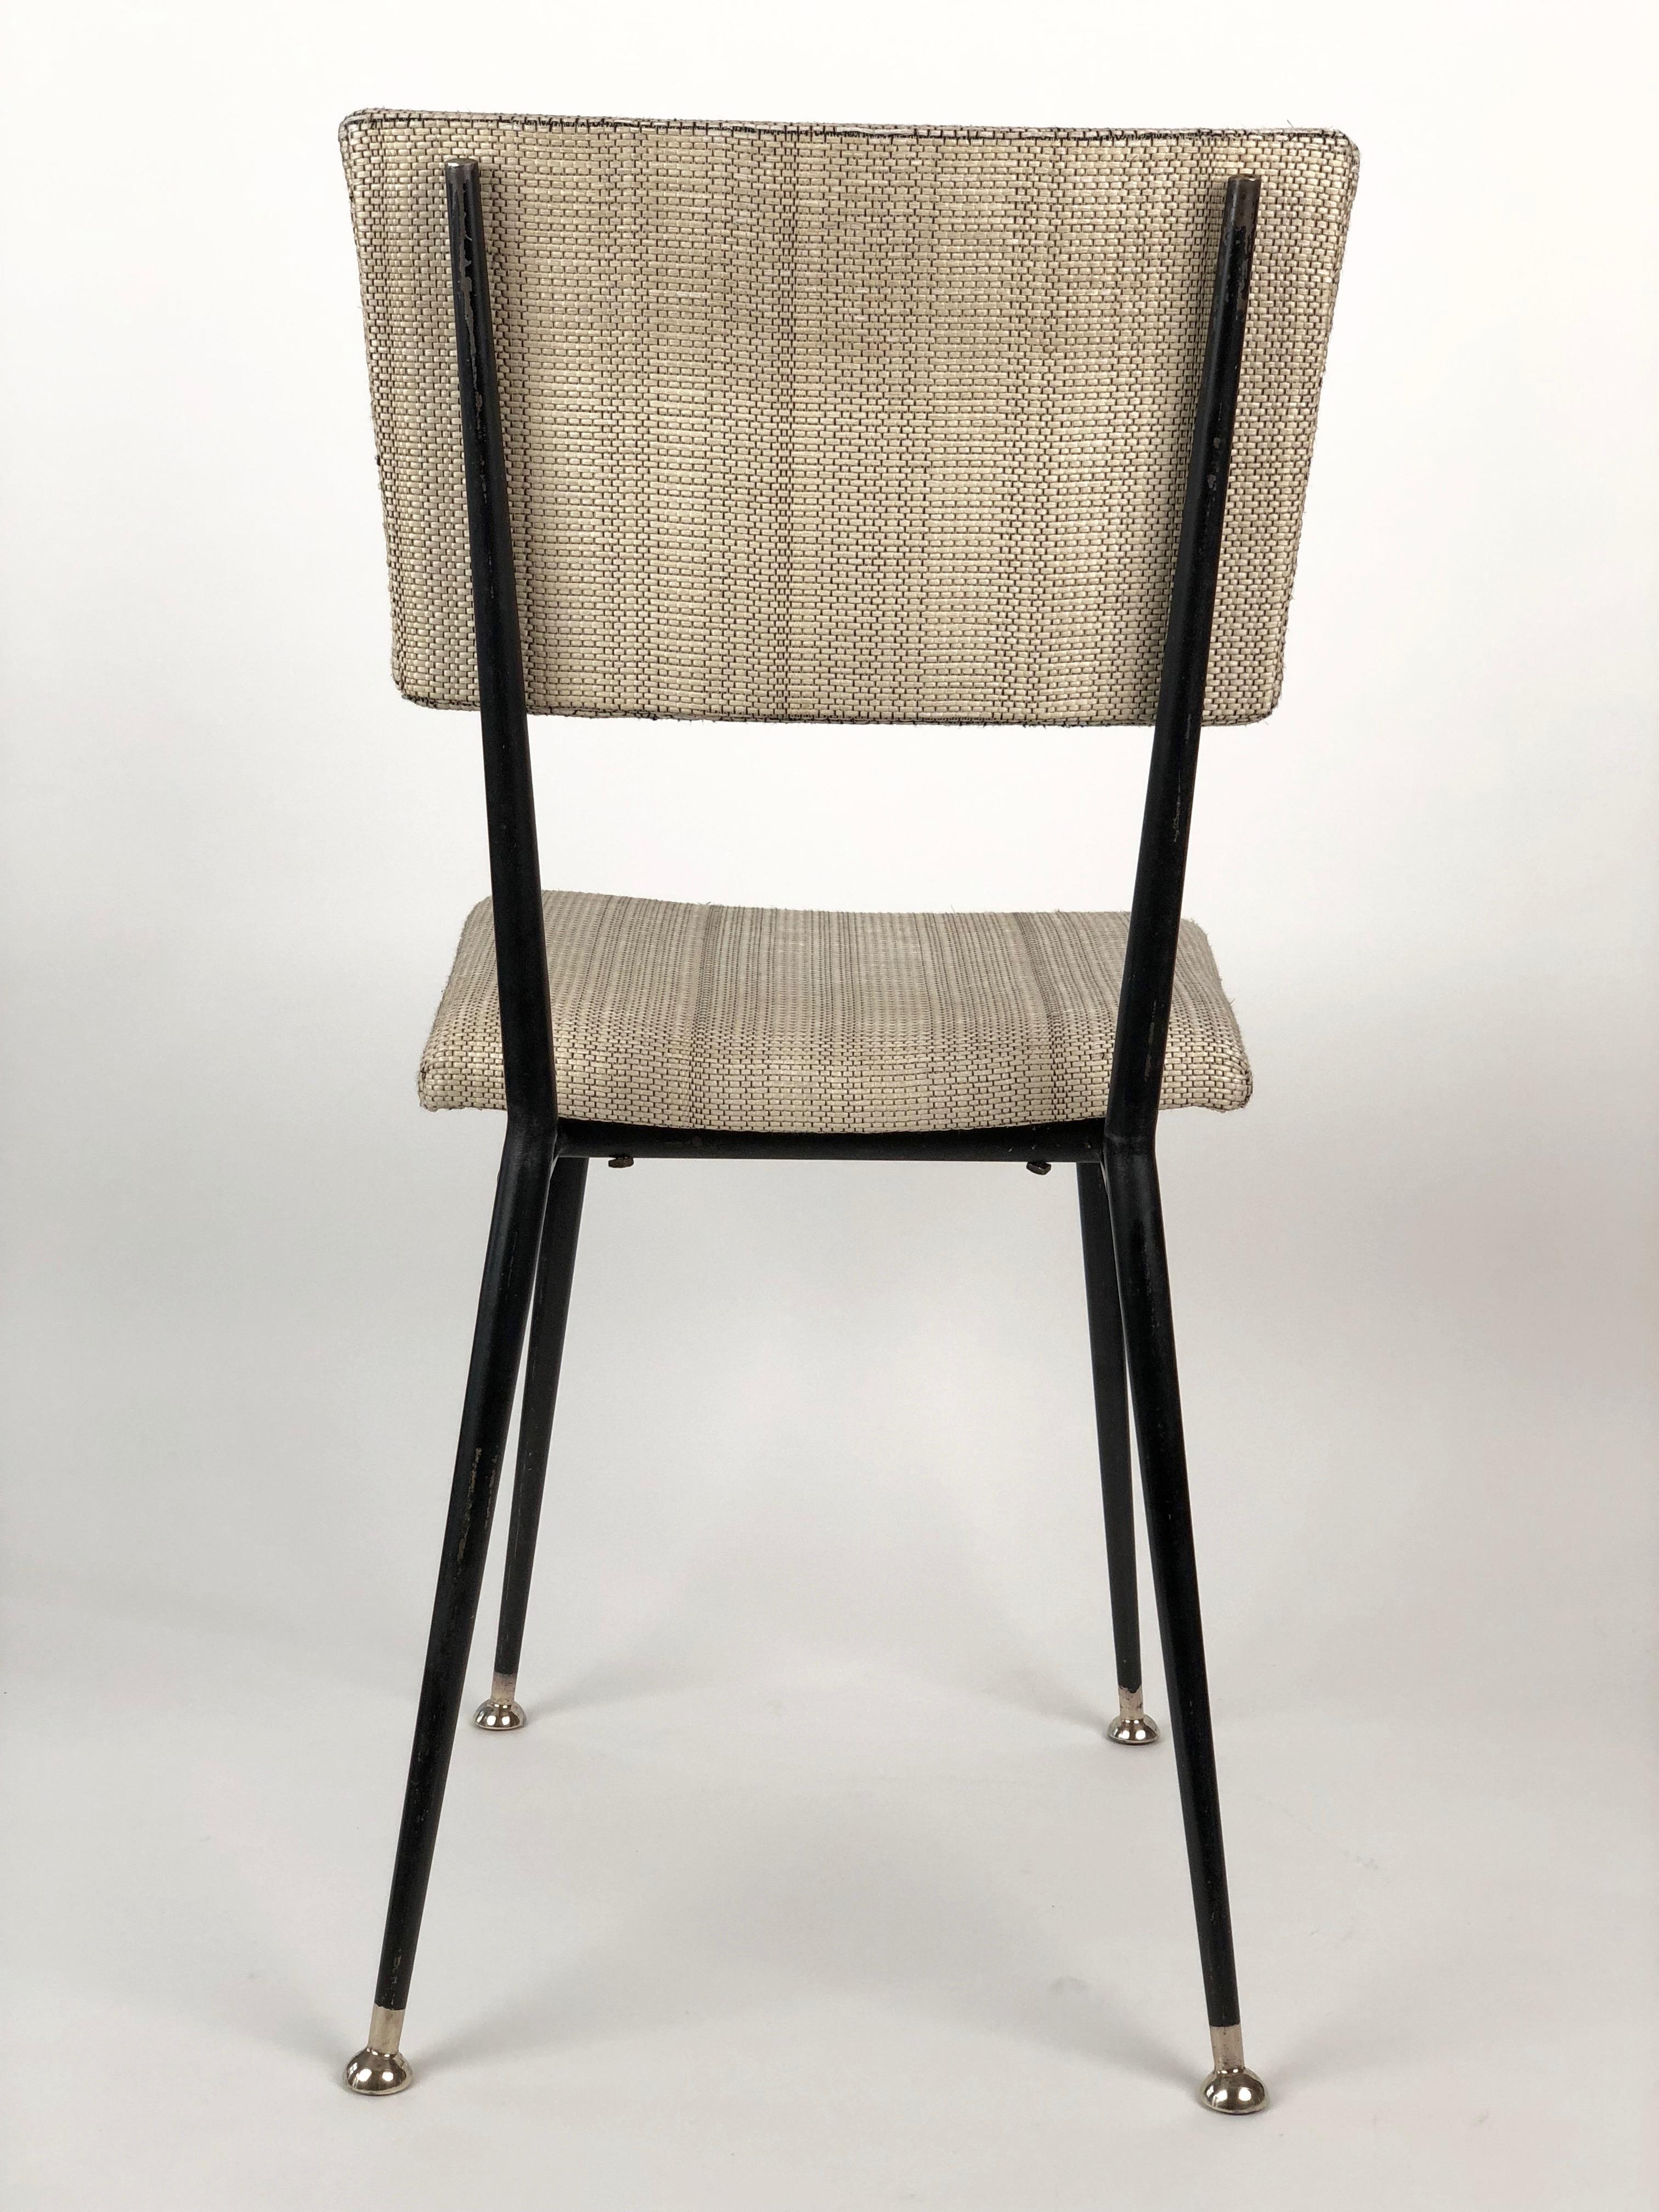 Austrian Midcentury Chair from Sonnet, Made in Austria For Sale